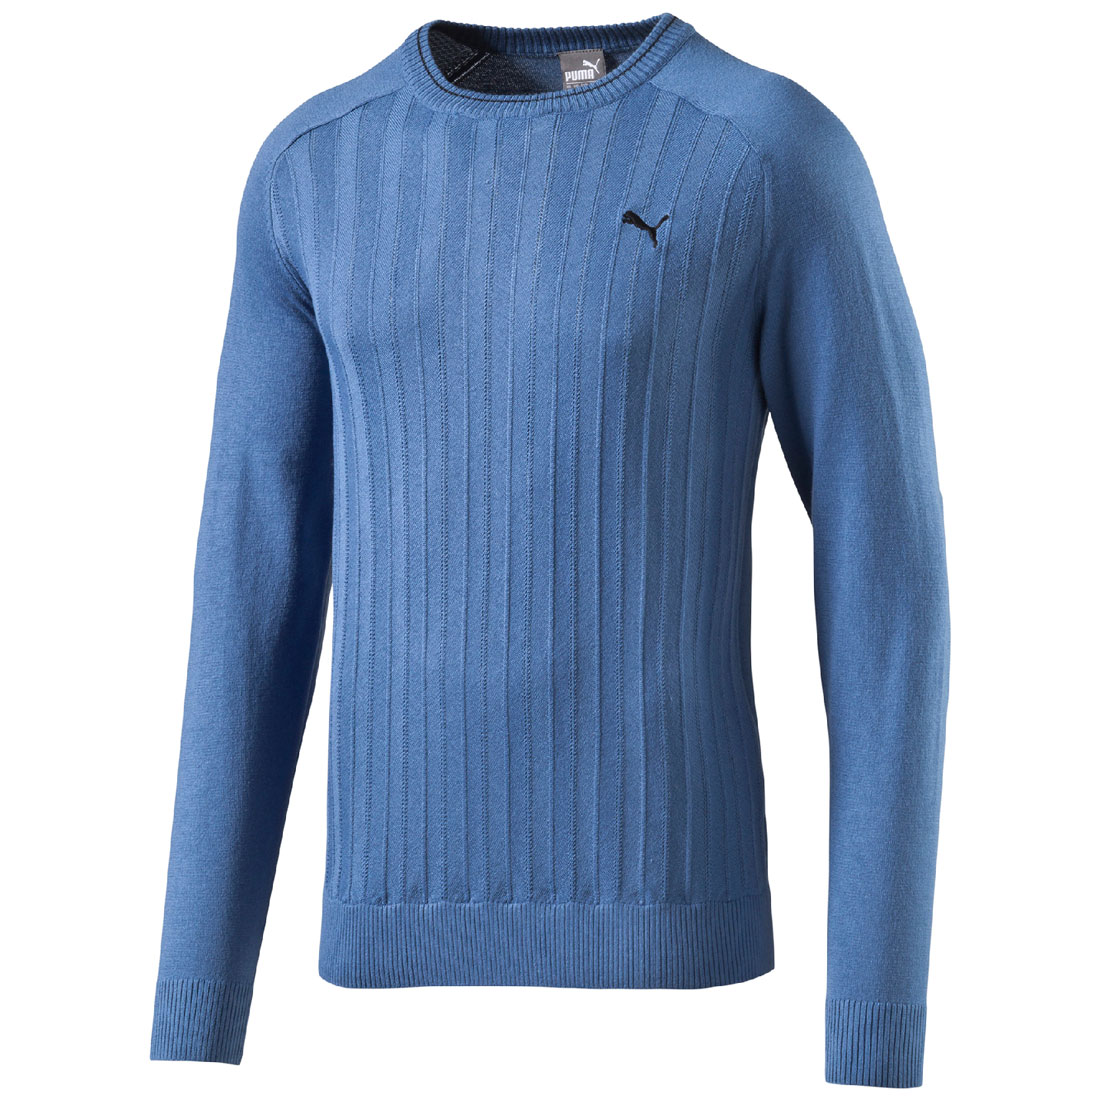 Puma Golf Sport Lux Crew Neck Sweater Pullunder Pullover Thermo Cool